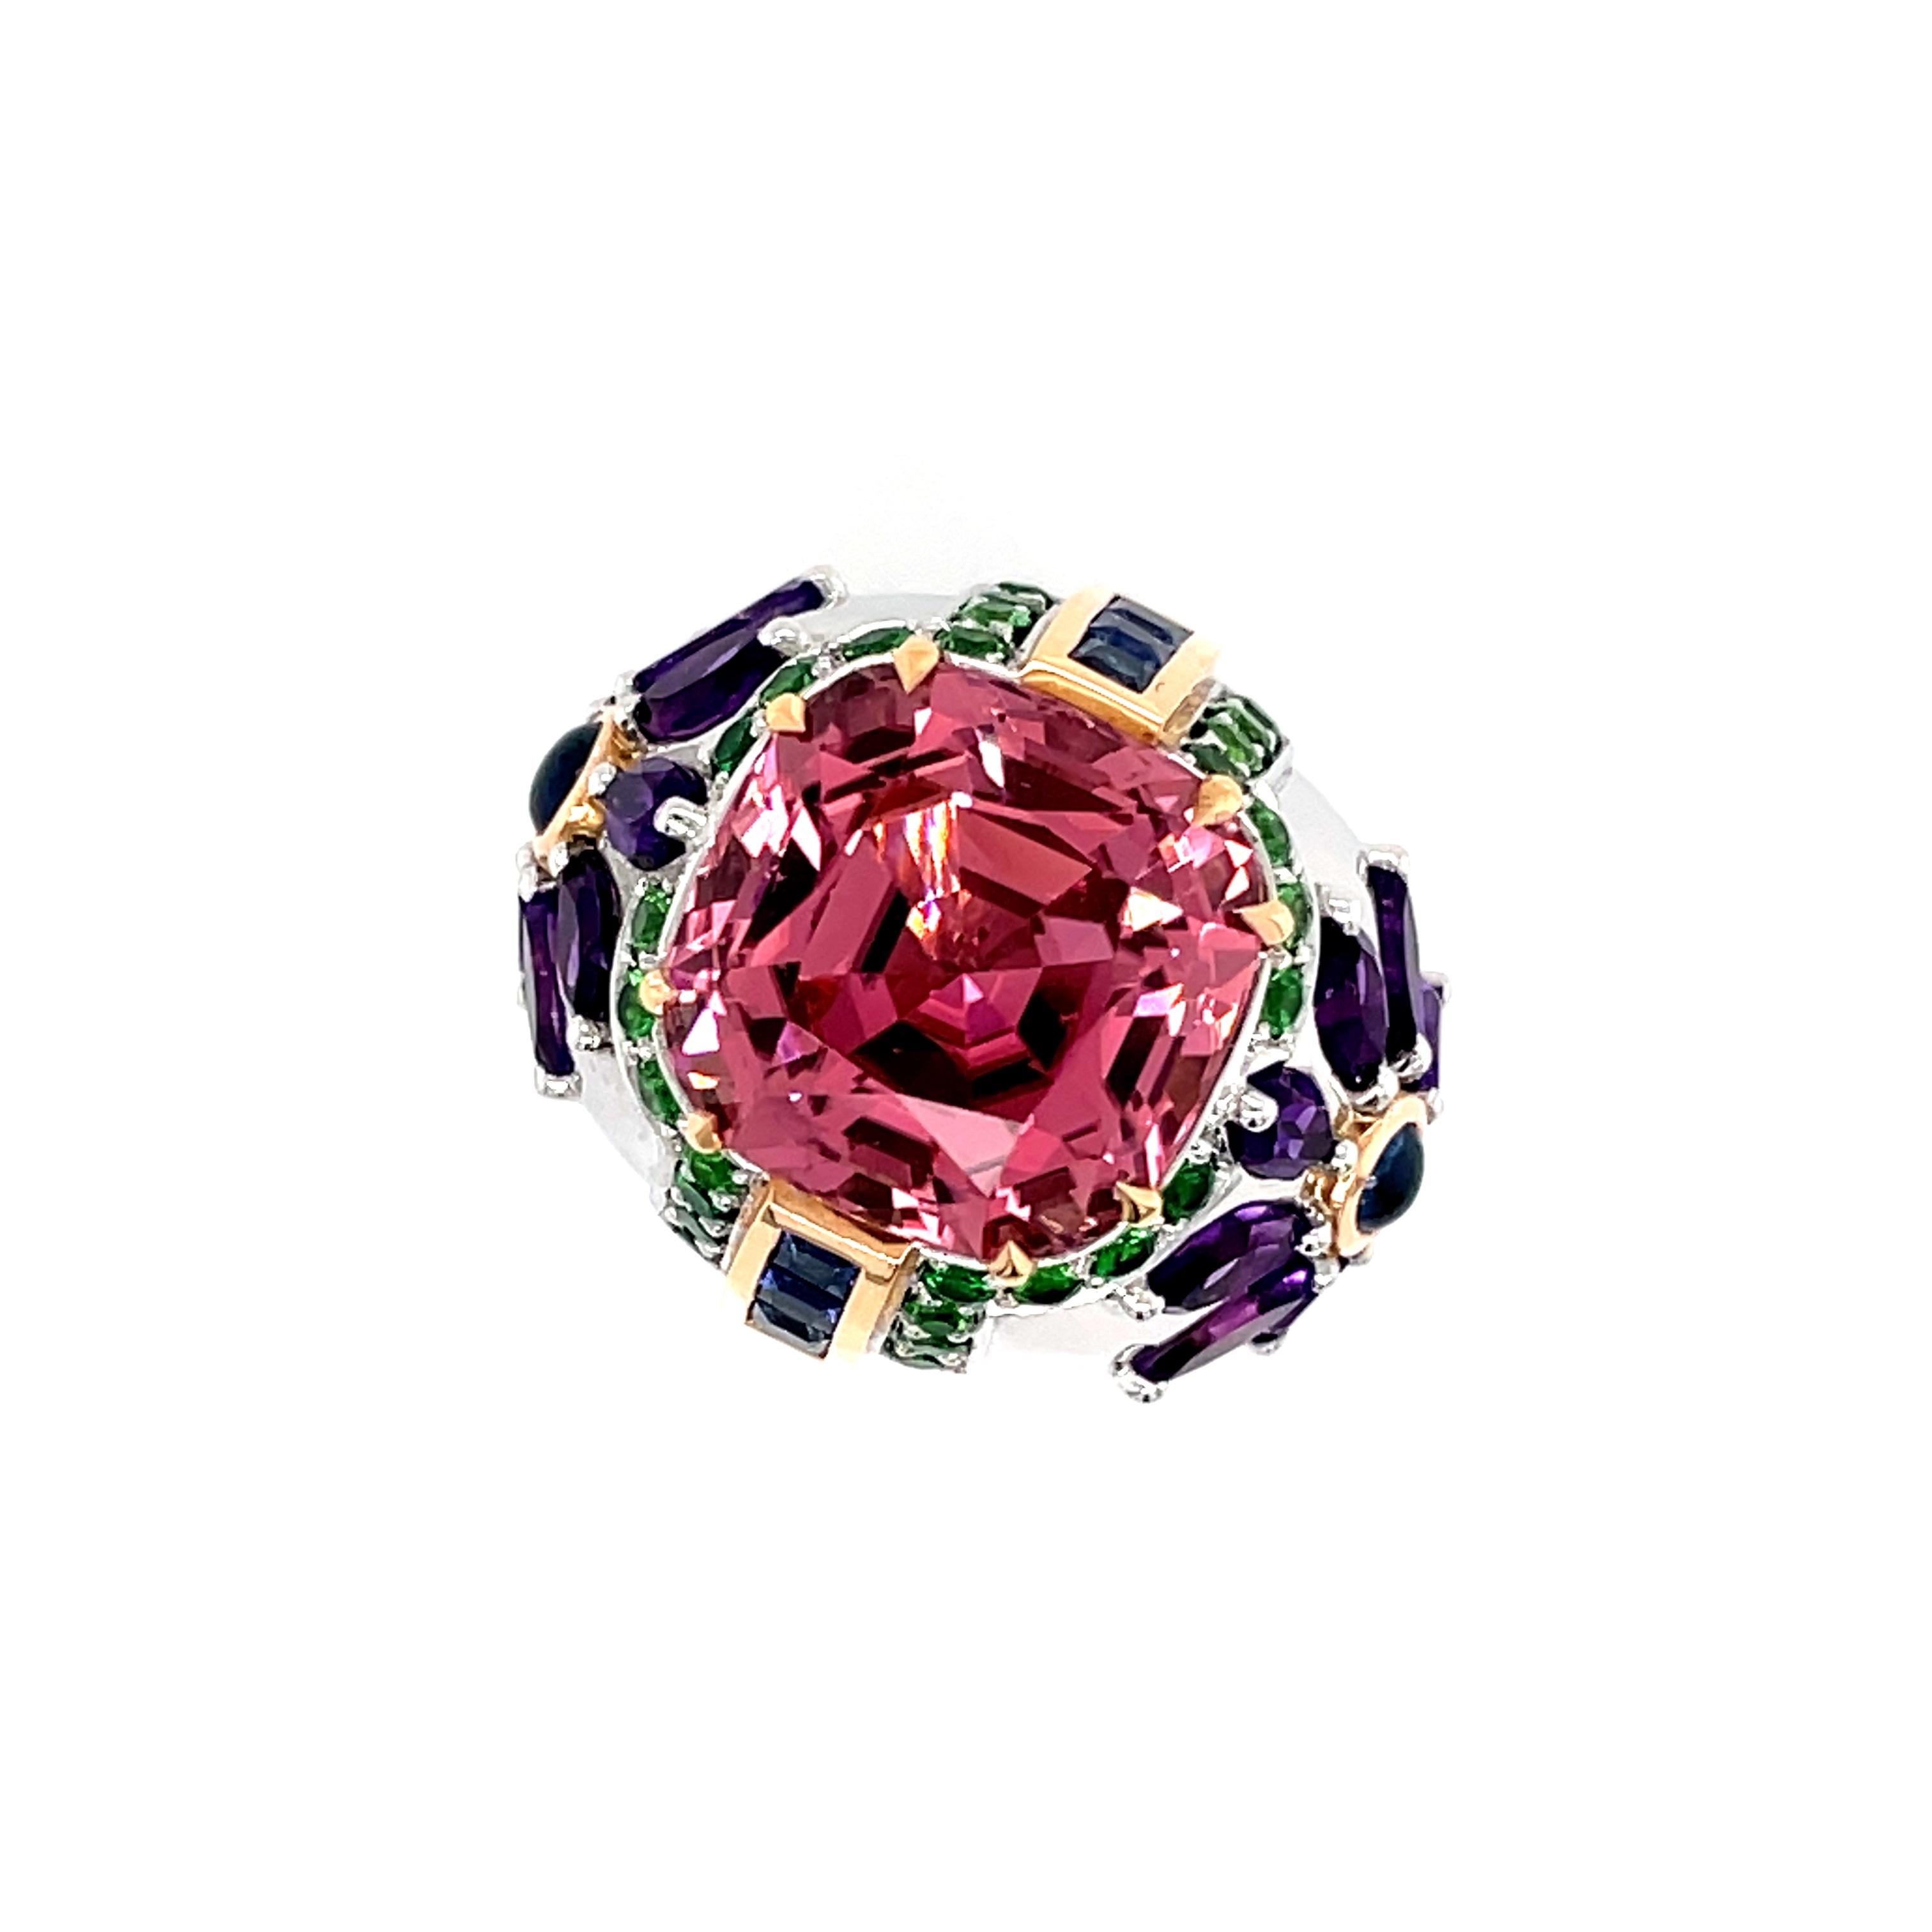 10.51ct Tourmaline Cocktail Ring with Garnets, Sapphires & Amethyst by Musson For Sale 1